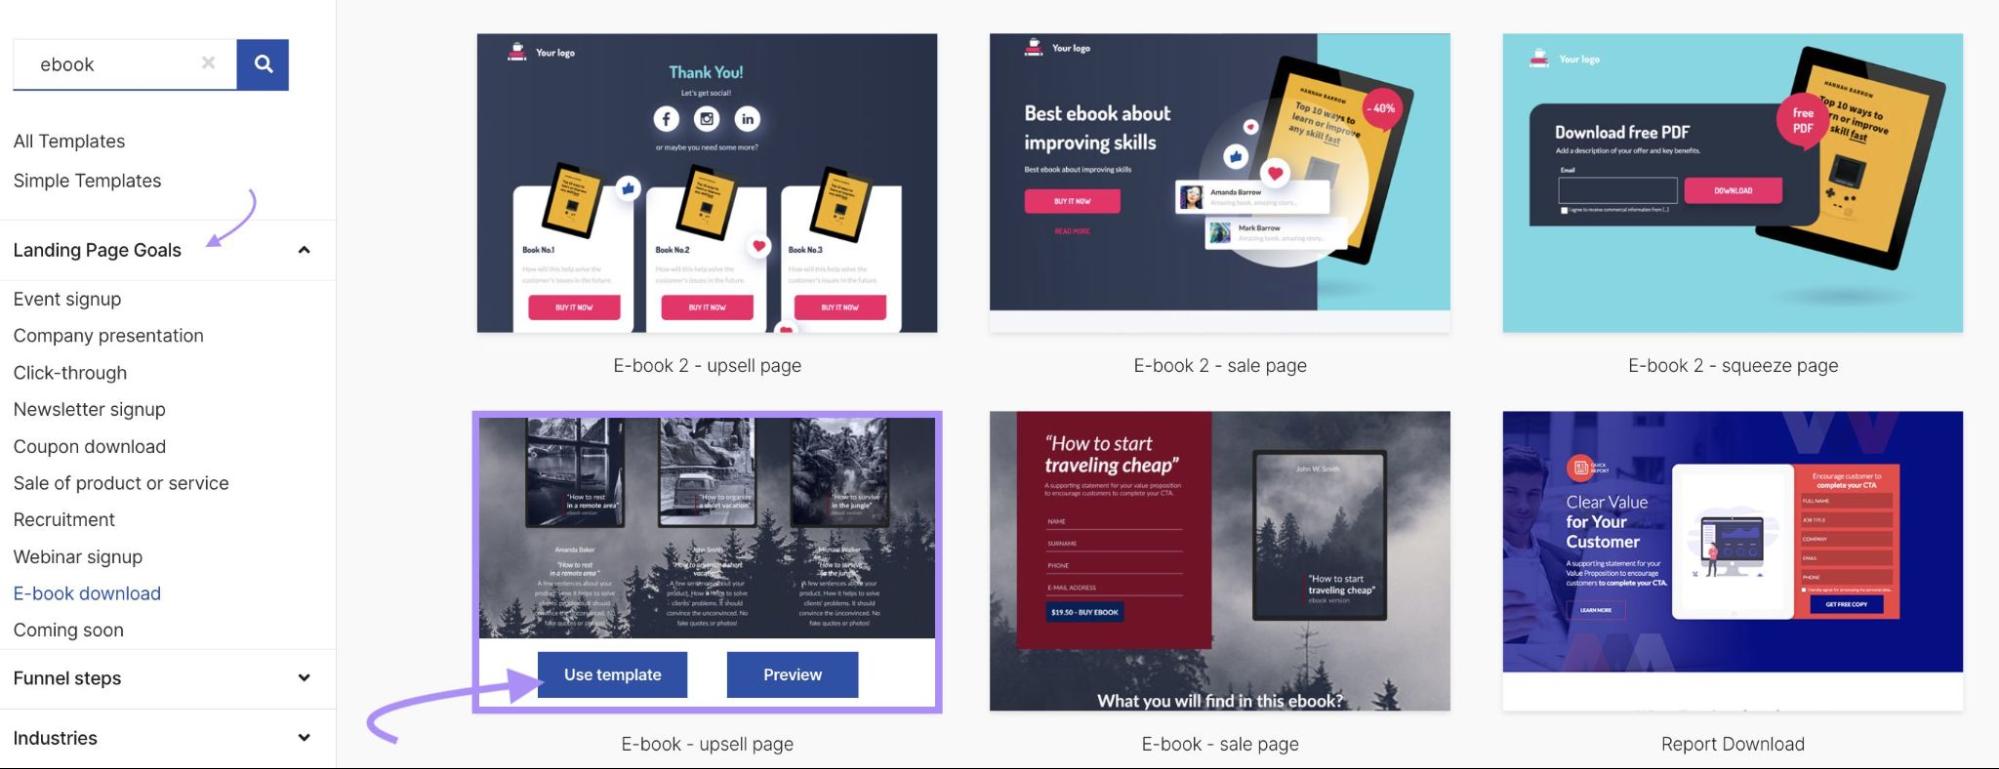 Landing Page Goals section with a template selected